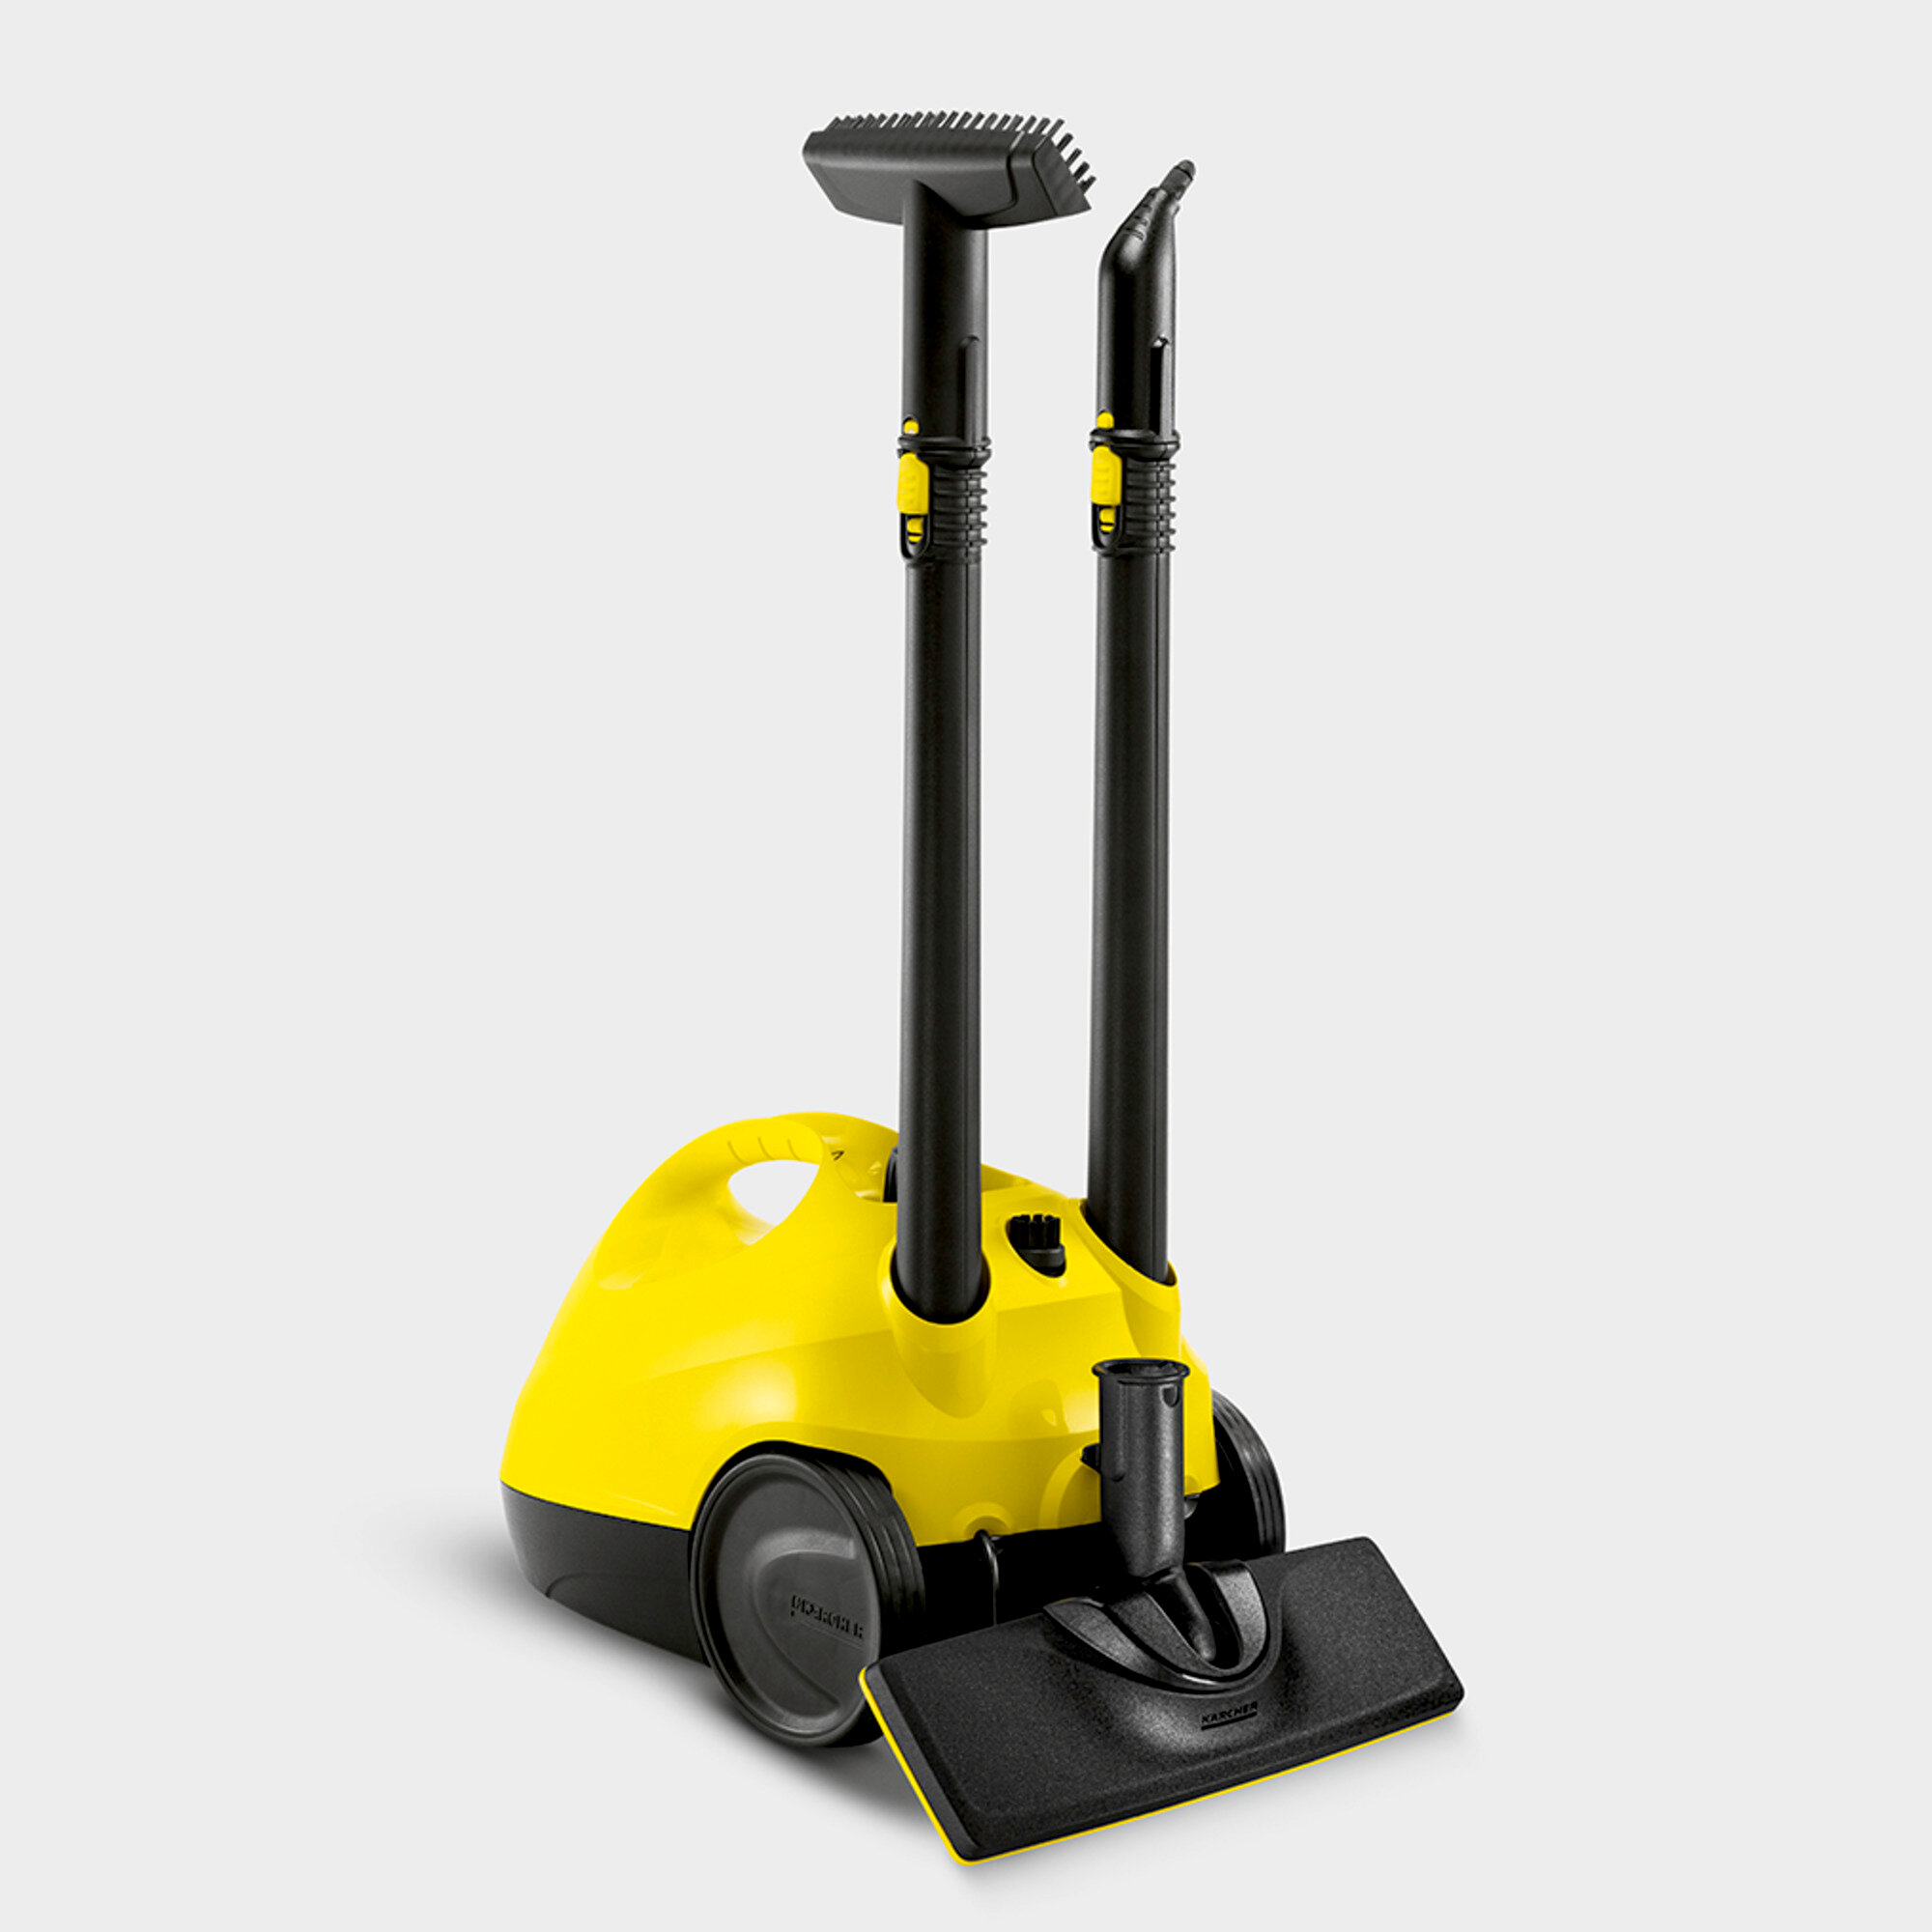 Steam cleaner SC 2 EasyFix: Accessory storage and parking position